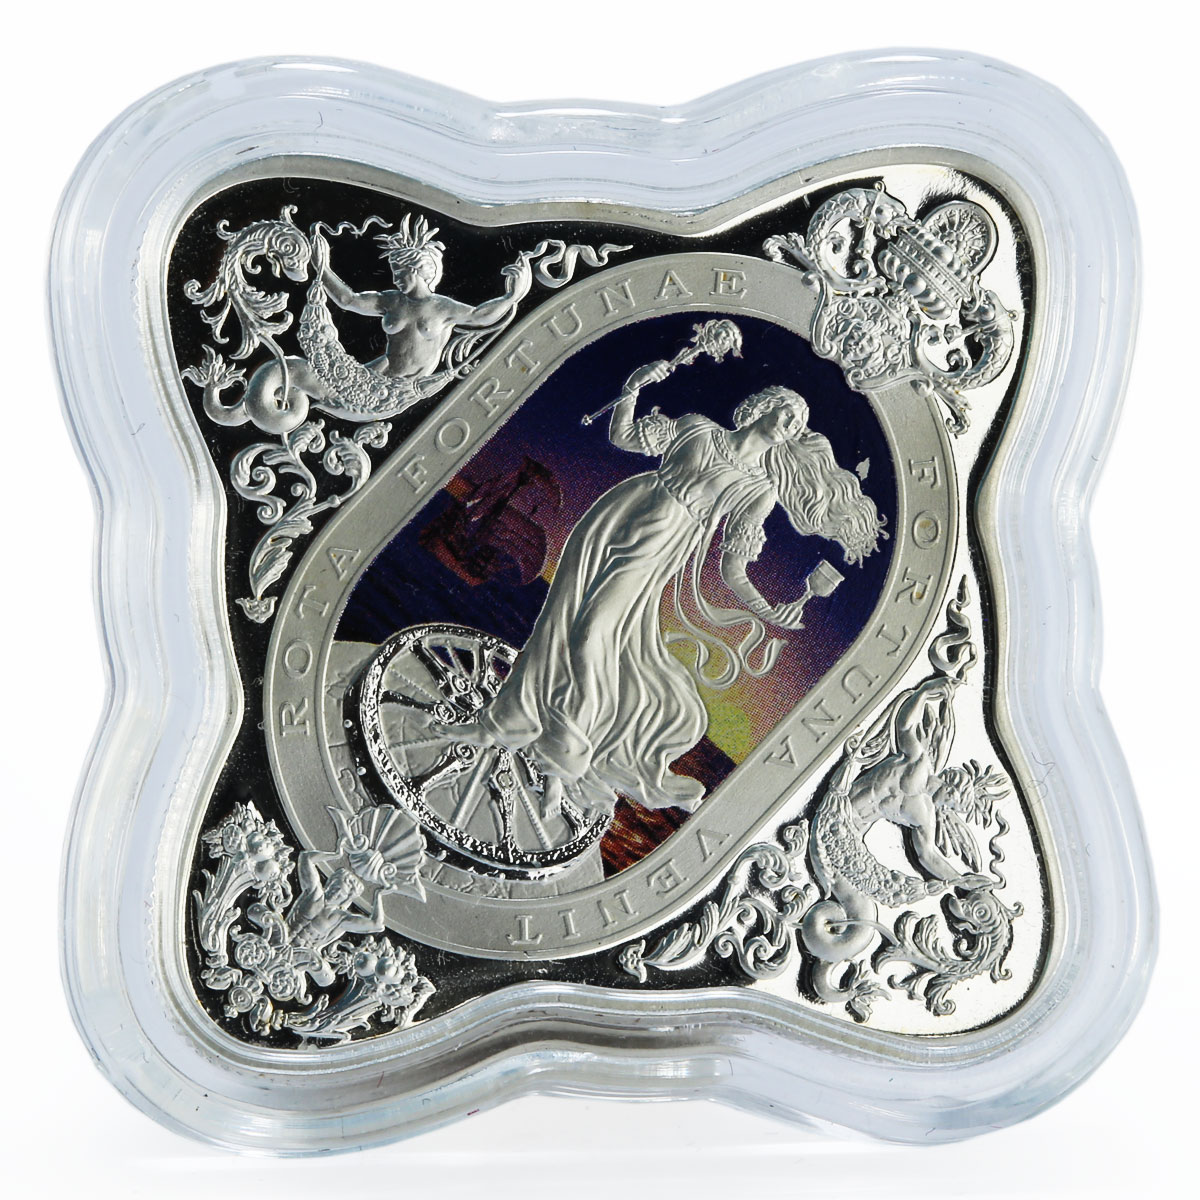 Tokelau 1 dollar Lady of Fortune colored proof silver coin 2014